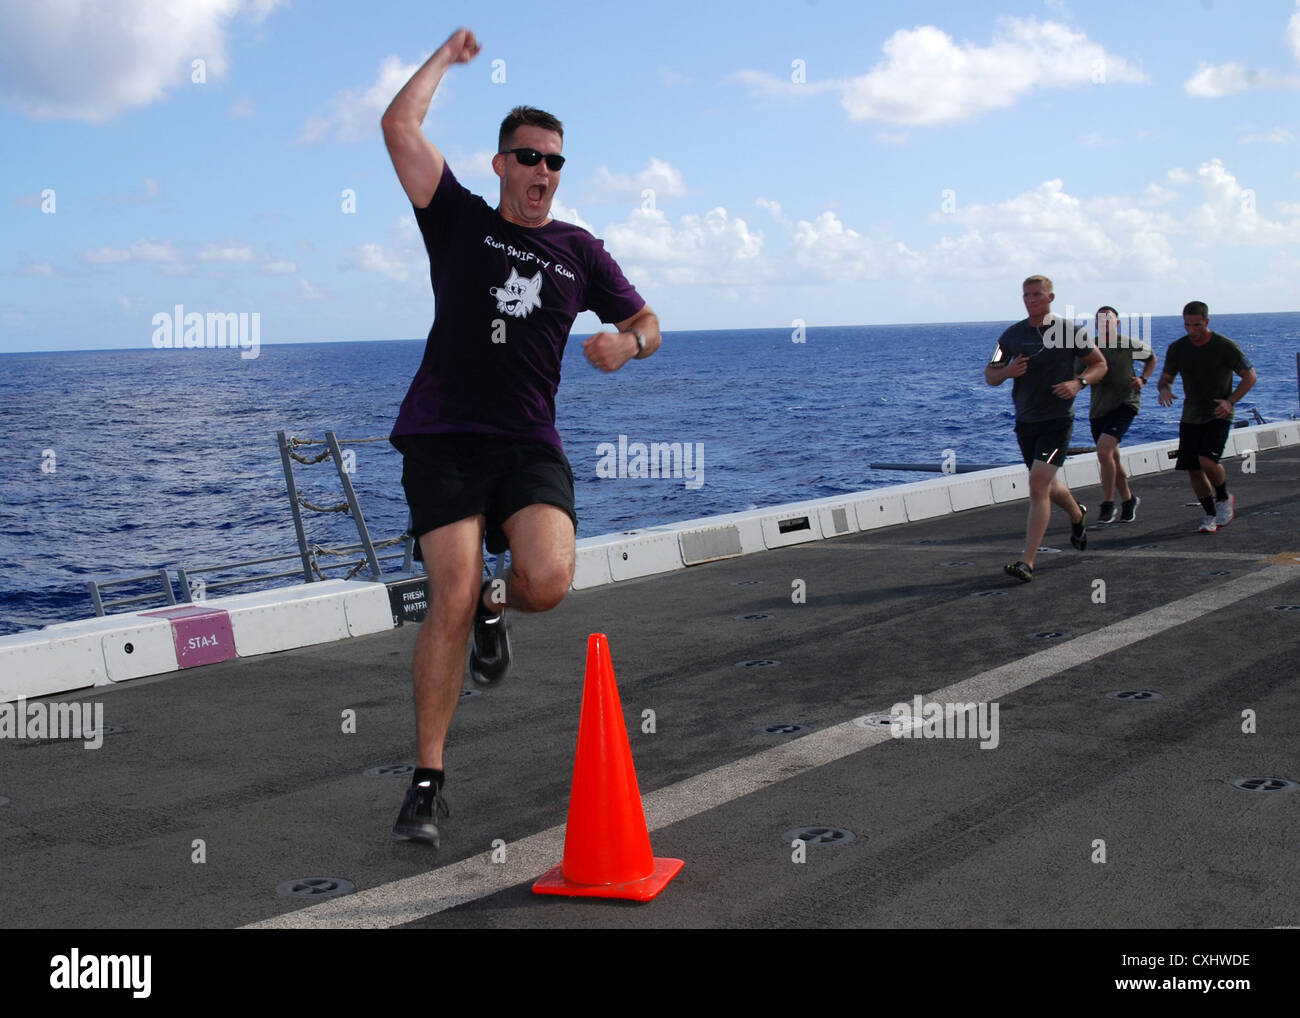 Capt. Zachary Jones expresses his excitement as he finishes the Landaker 5k held by the â€œPurple Foxesâ€ of Marine Medium Helicopter Squadron (HMM) 364 (REIN) aboard amphibious transport dock ship USS Green Bay (LPD 20). Green Bay is part of the Peleliu Amphibious Ready Group currently underway on a Western Pacific deployment with amphibious assault ship USS Peleliu (LHA 5) and amphibious dock landing ship USS Rushmore (LSD 47). Stock Photo